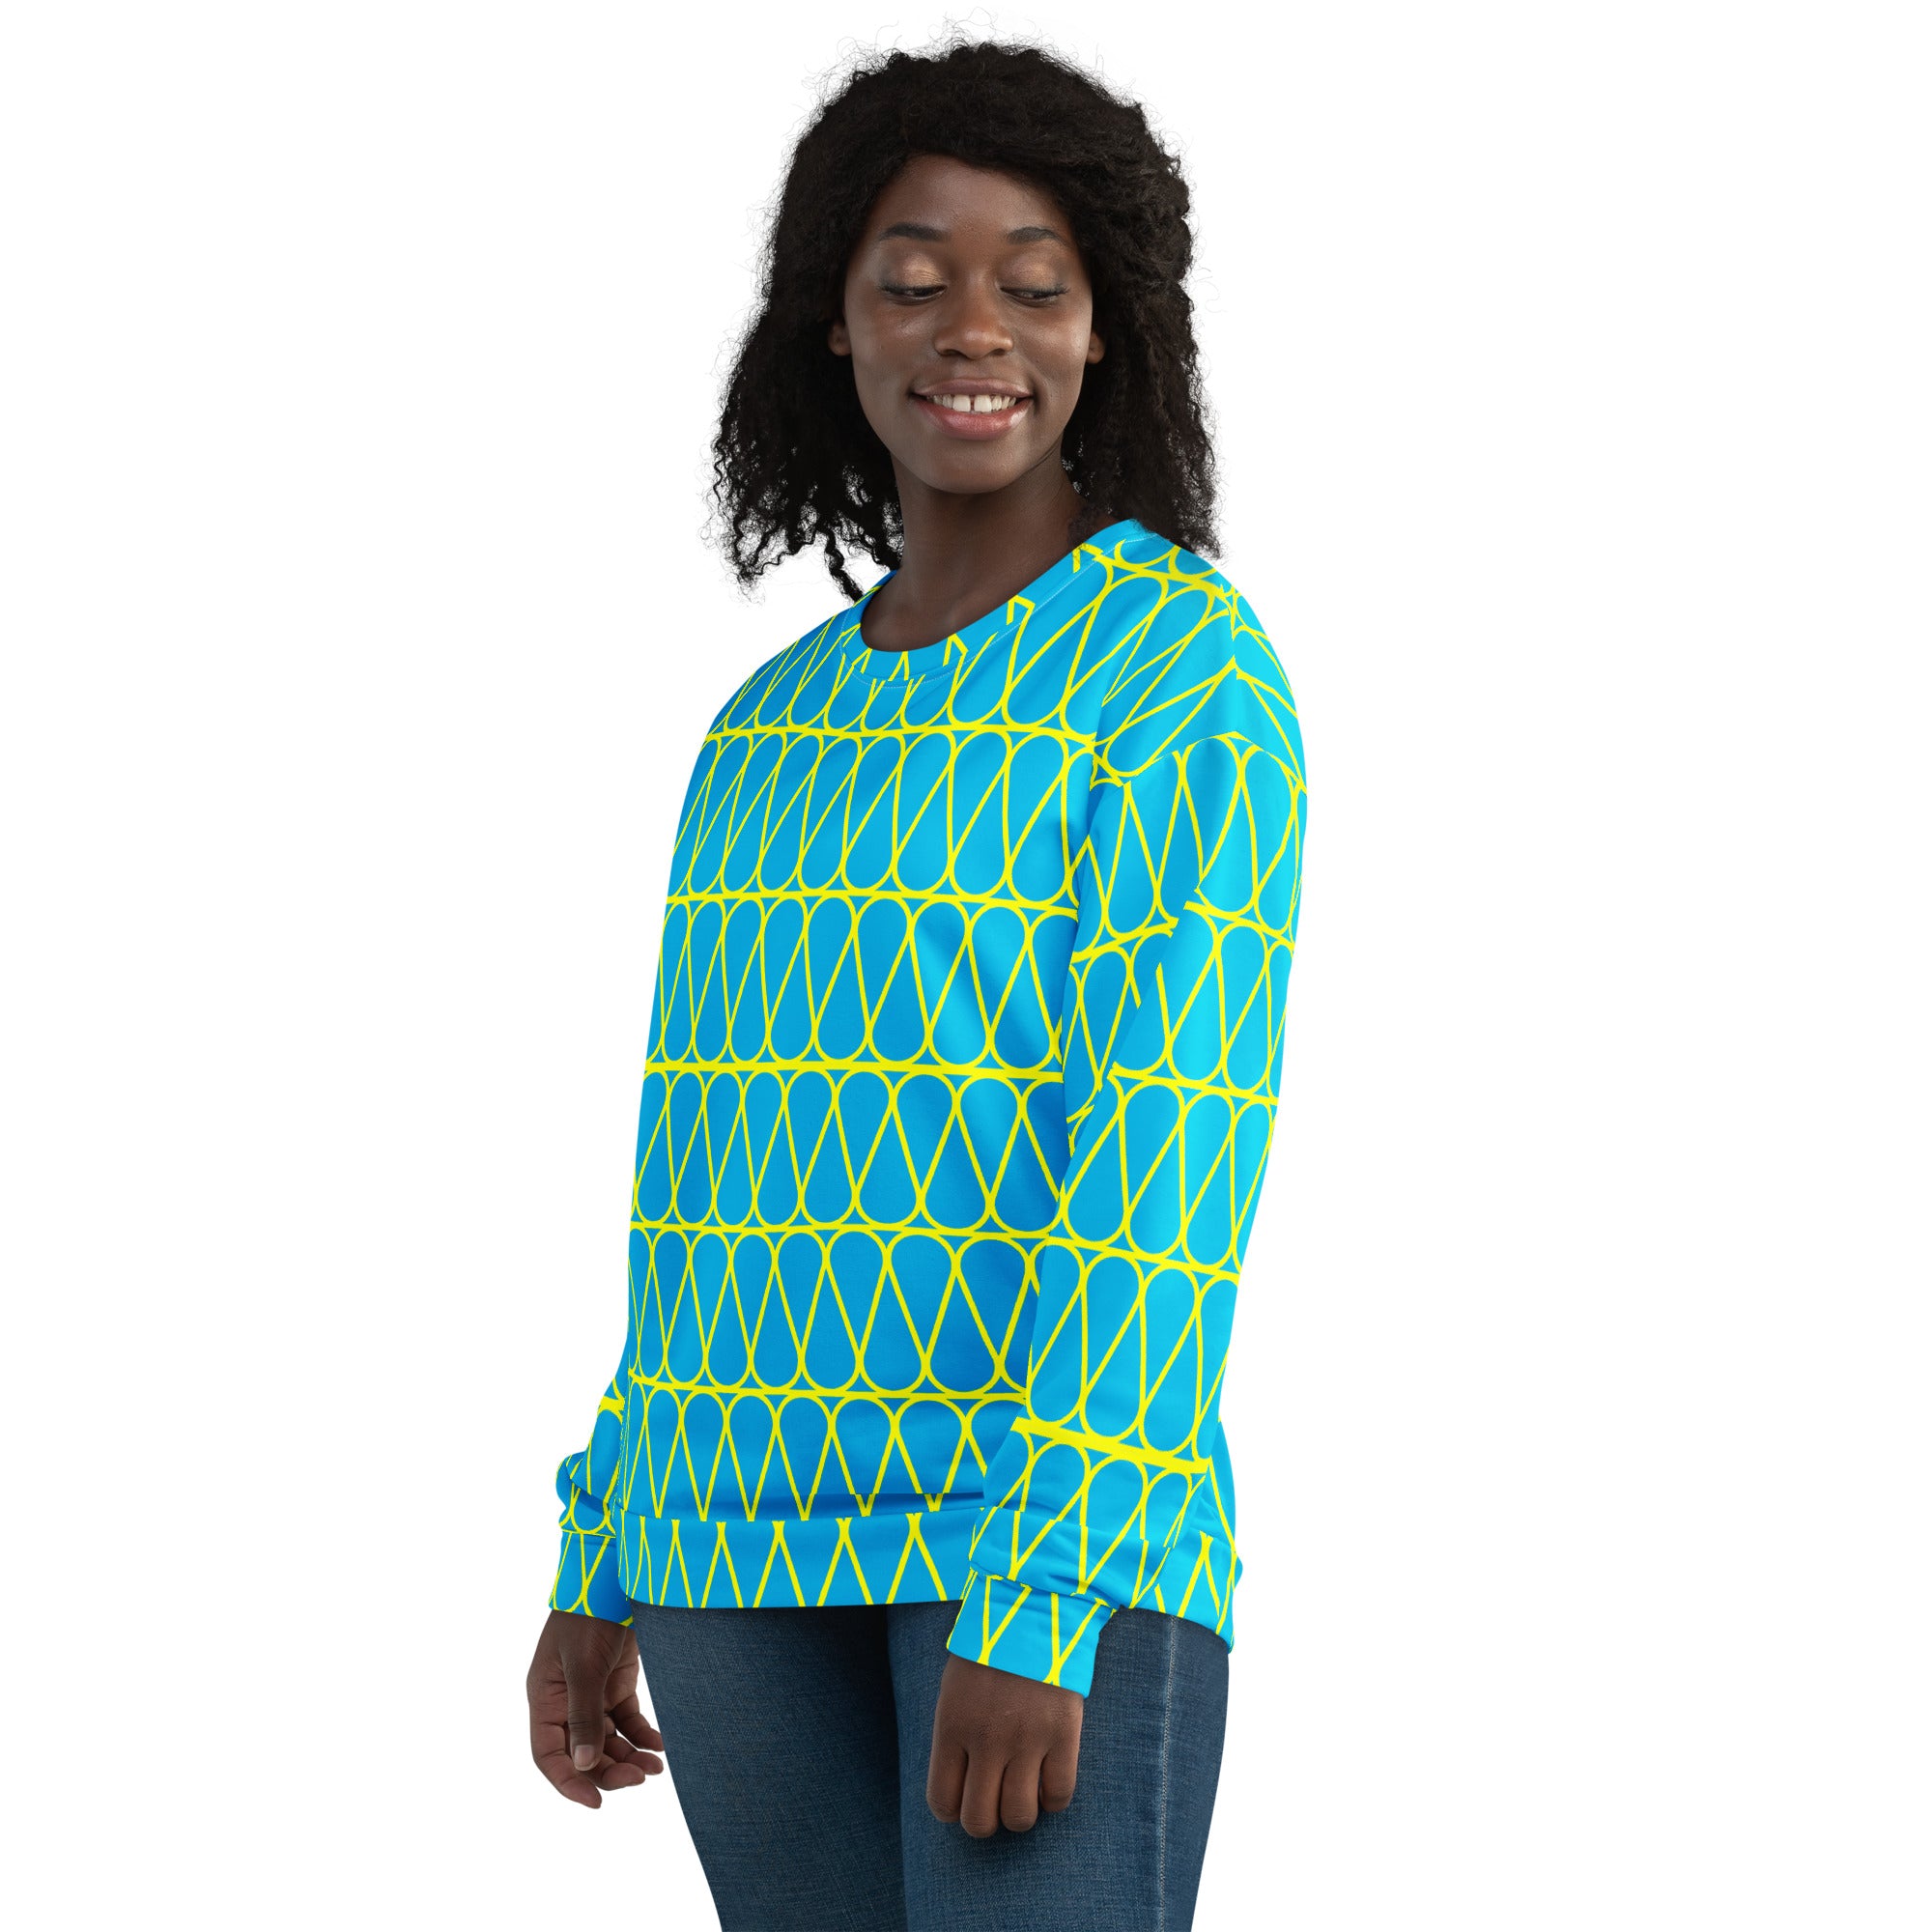 Insulation Yellow and Blue Hatch Unisex Recycled Sweatshirt